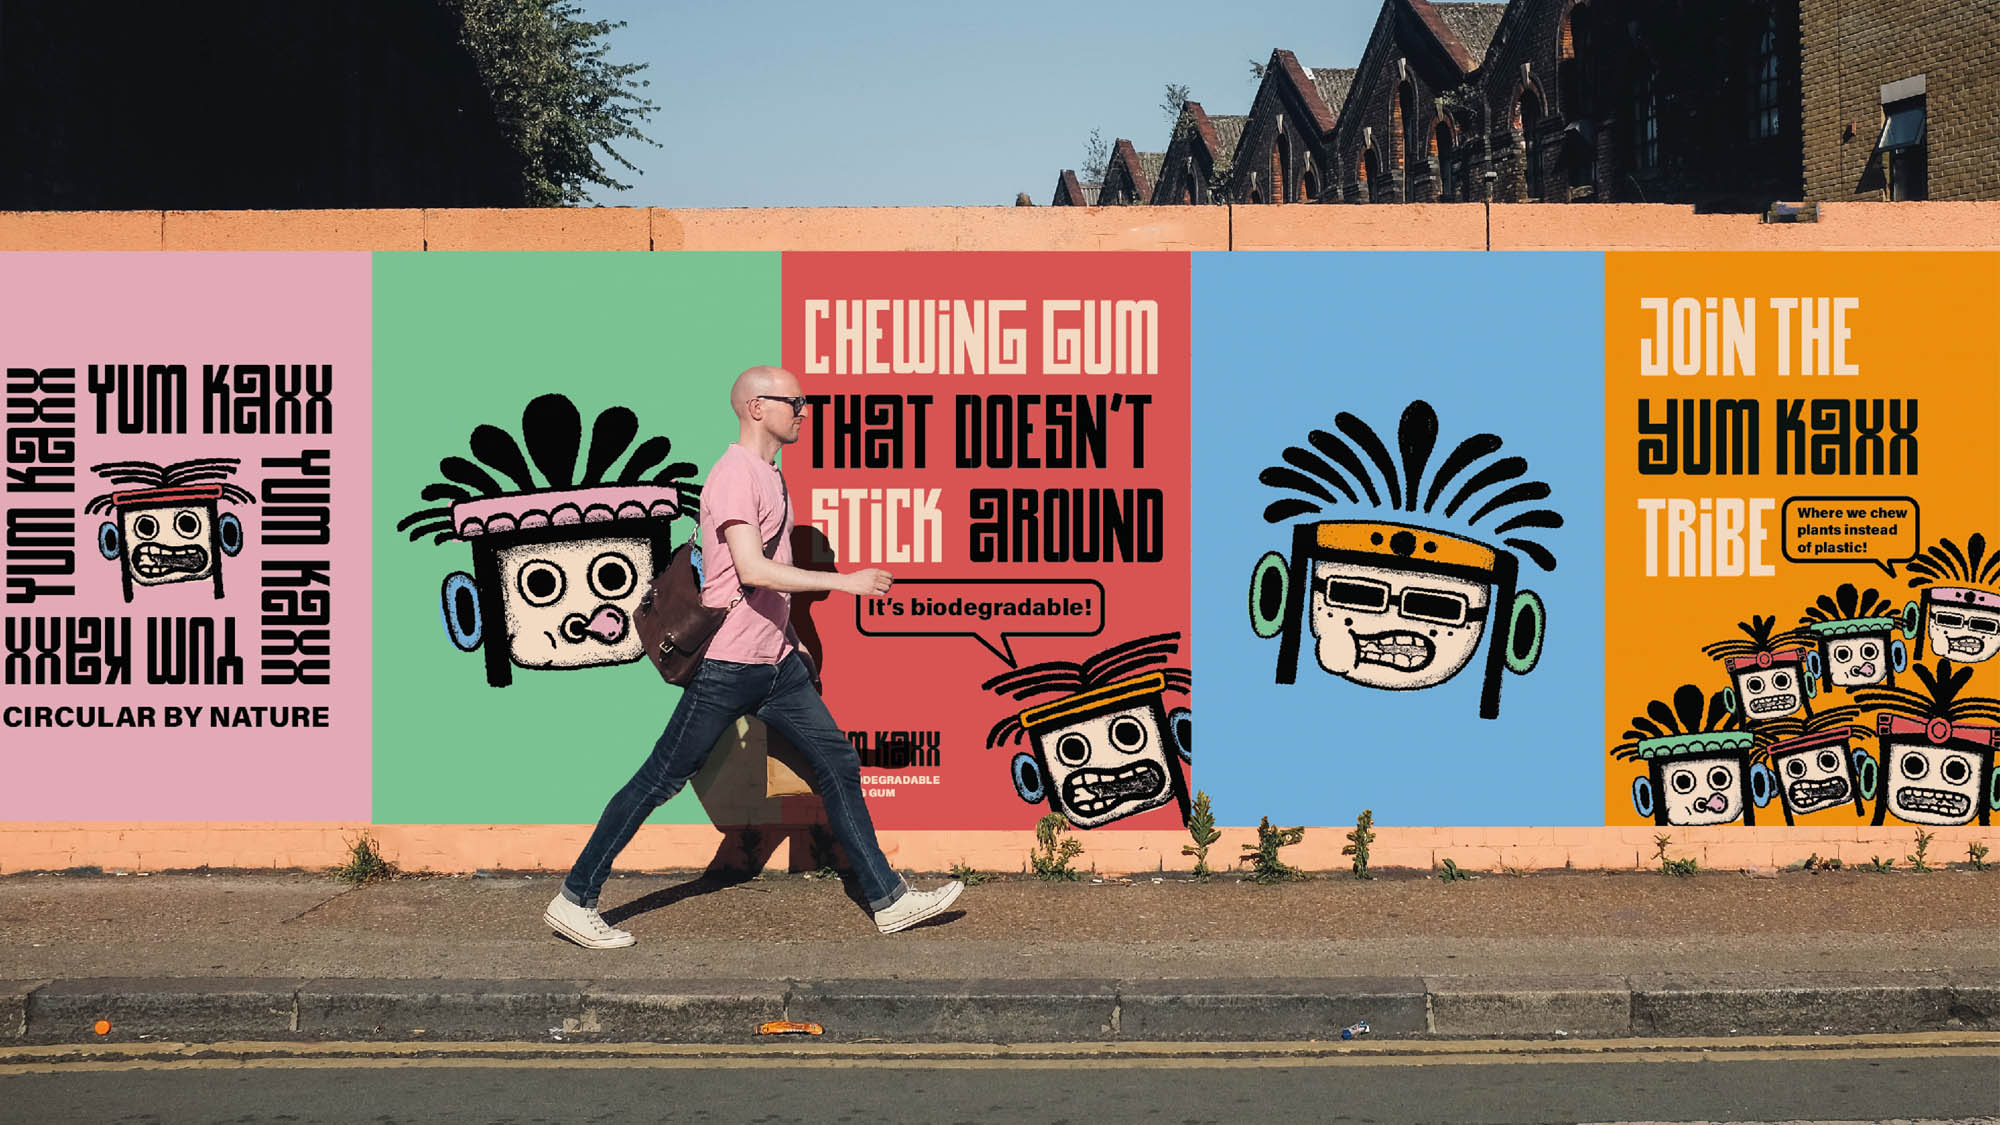 Graphic Design Work by Maisie Willis showing colourful chewing gum advertising mocked up into posters and street advertisement. Posters include bold text and character portraits.